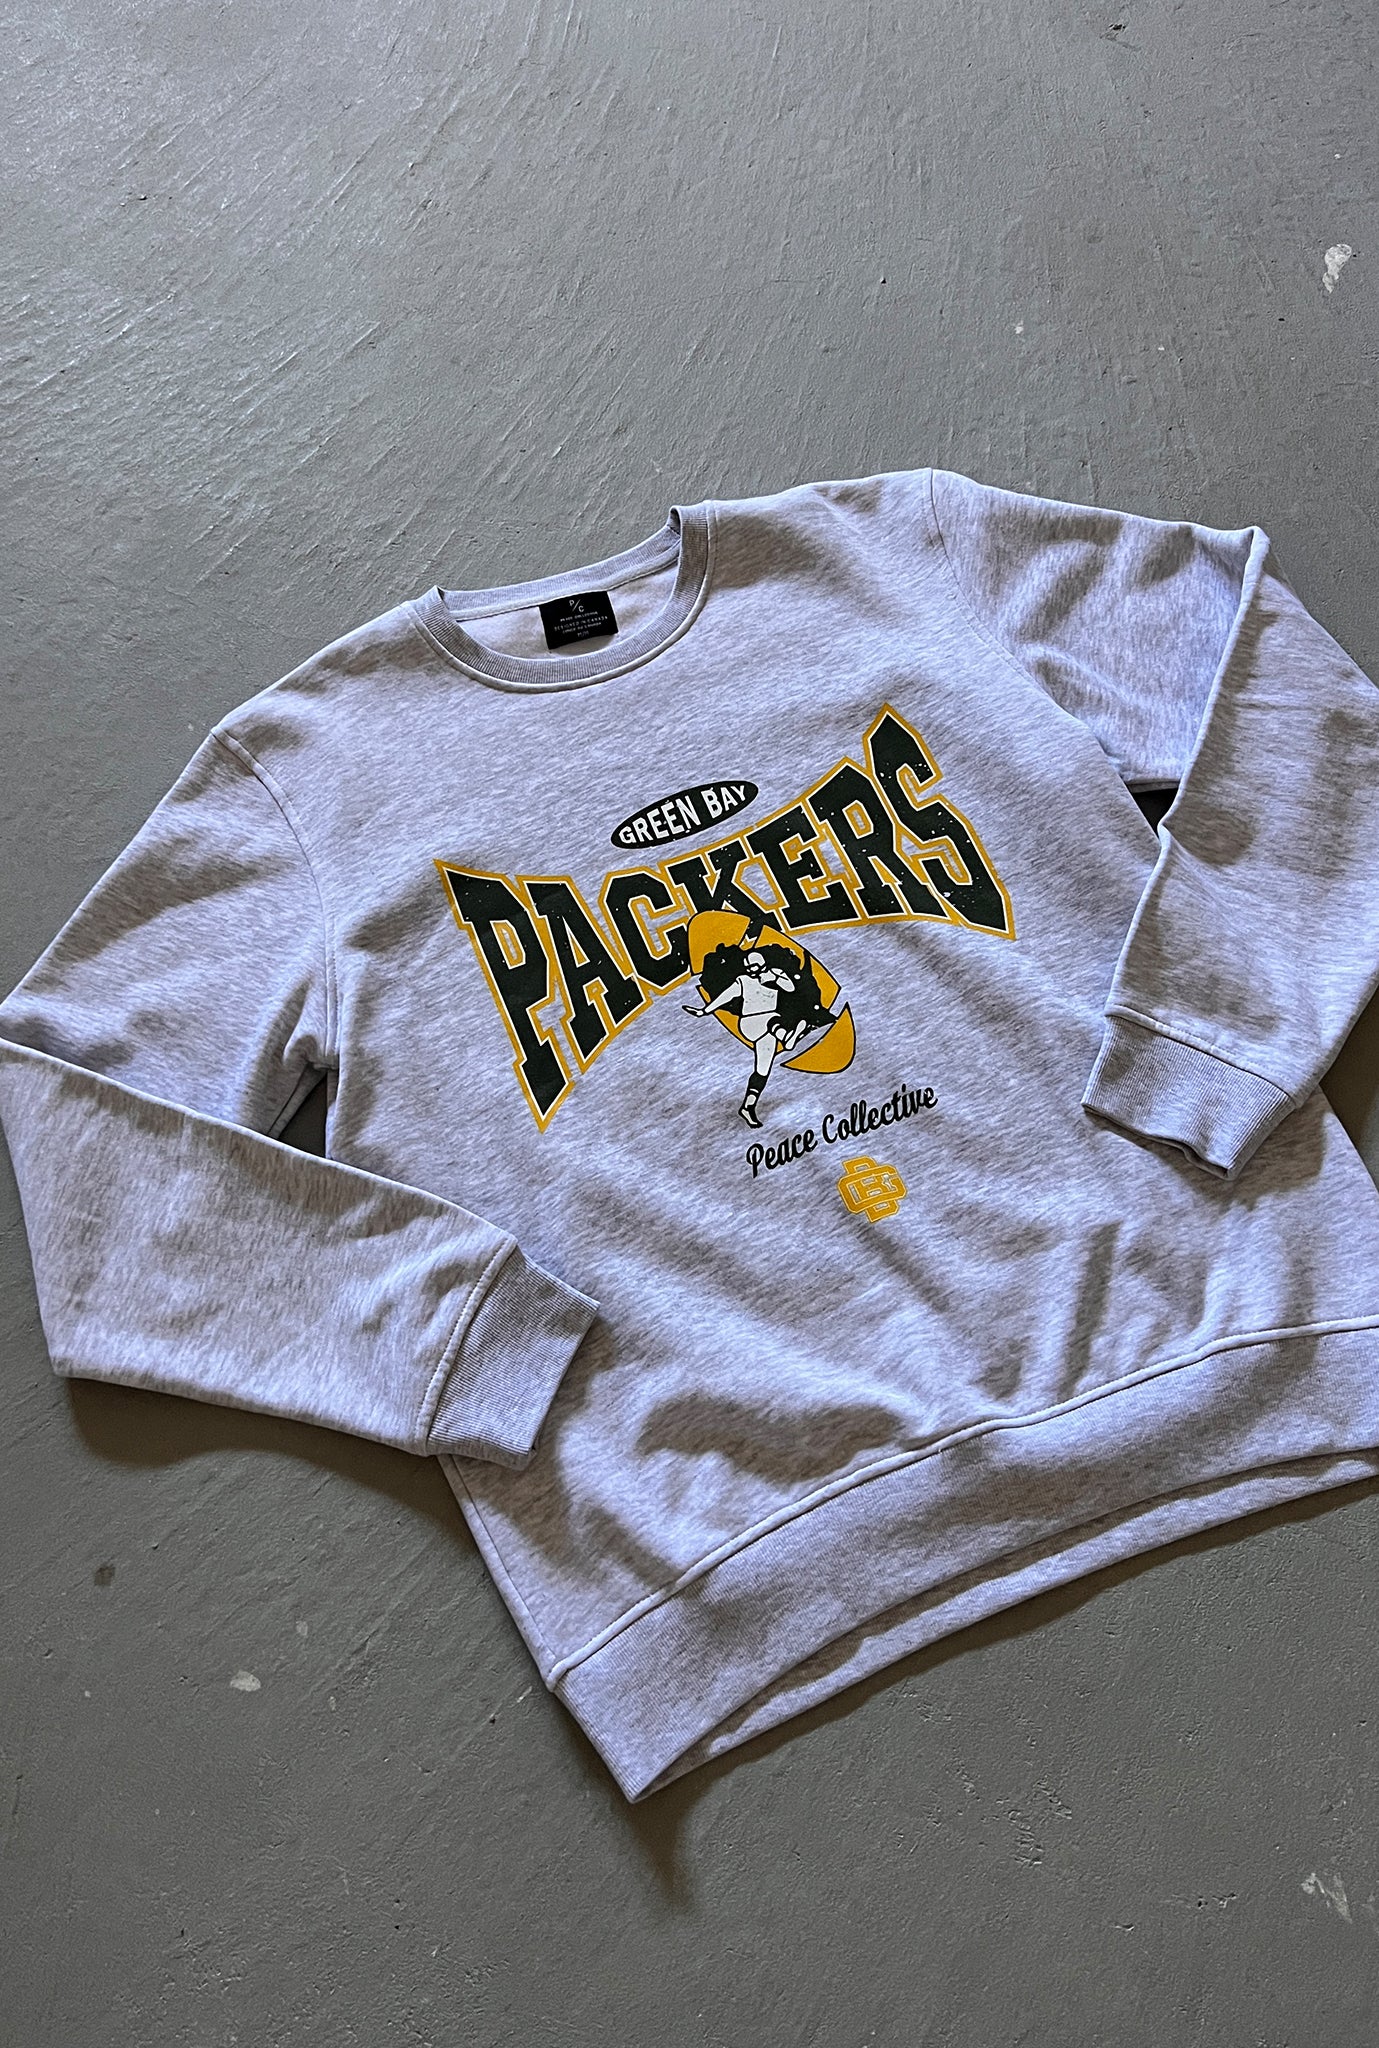 Green Bay Packers Washed Graphic Crewneck - Ash